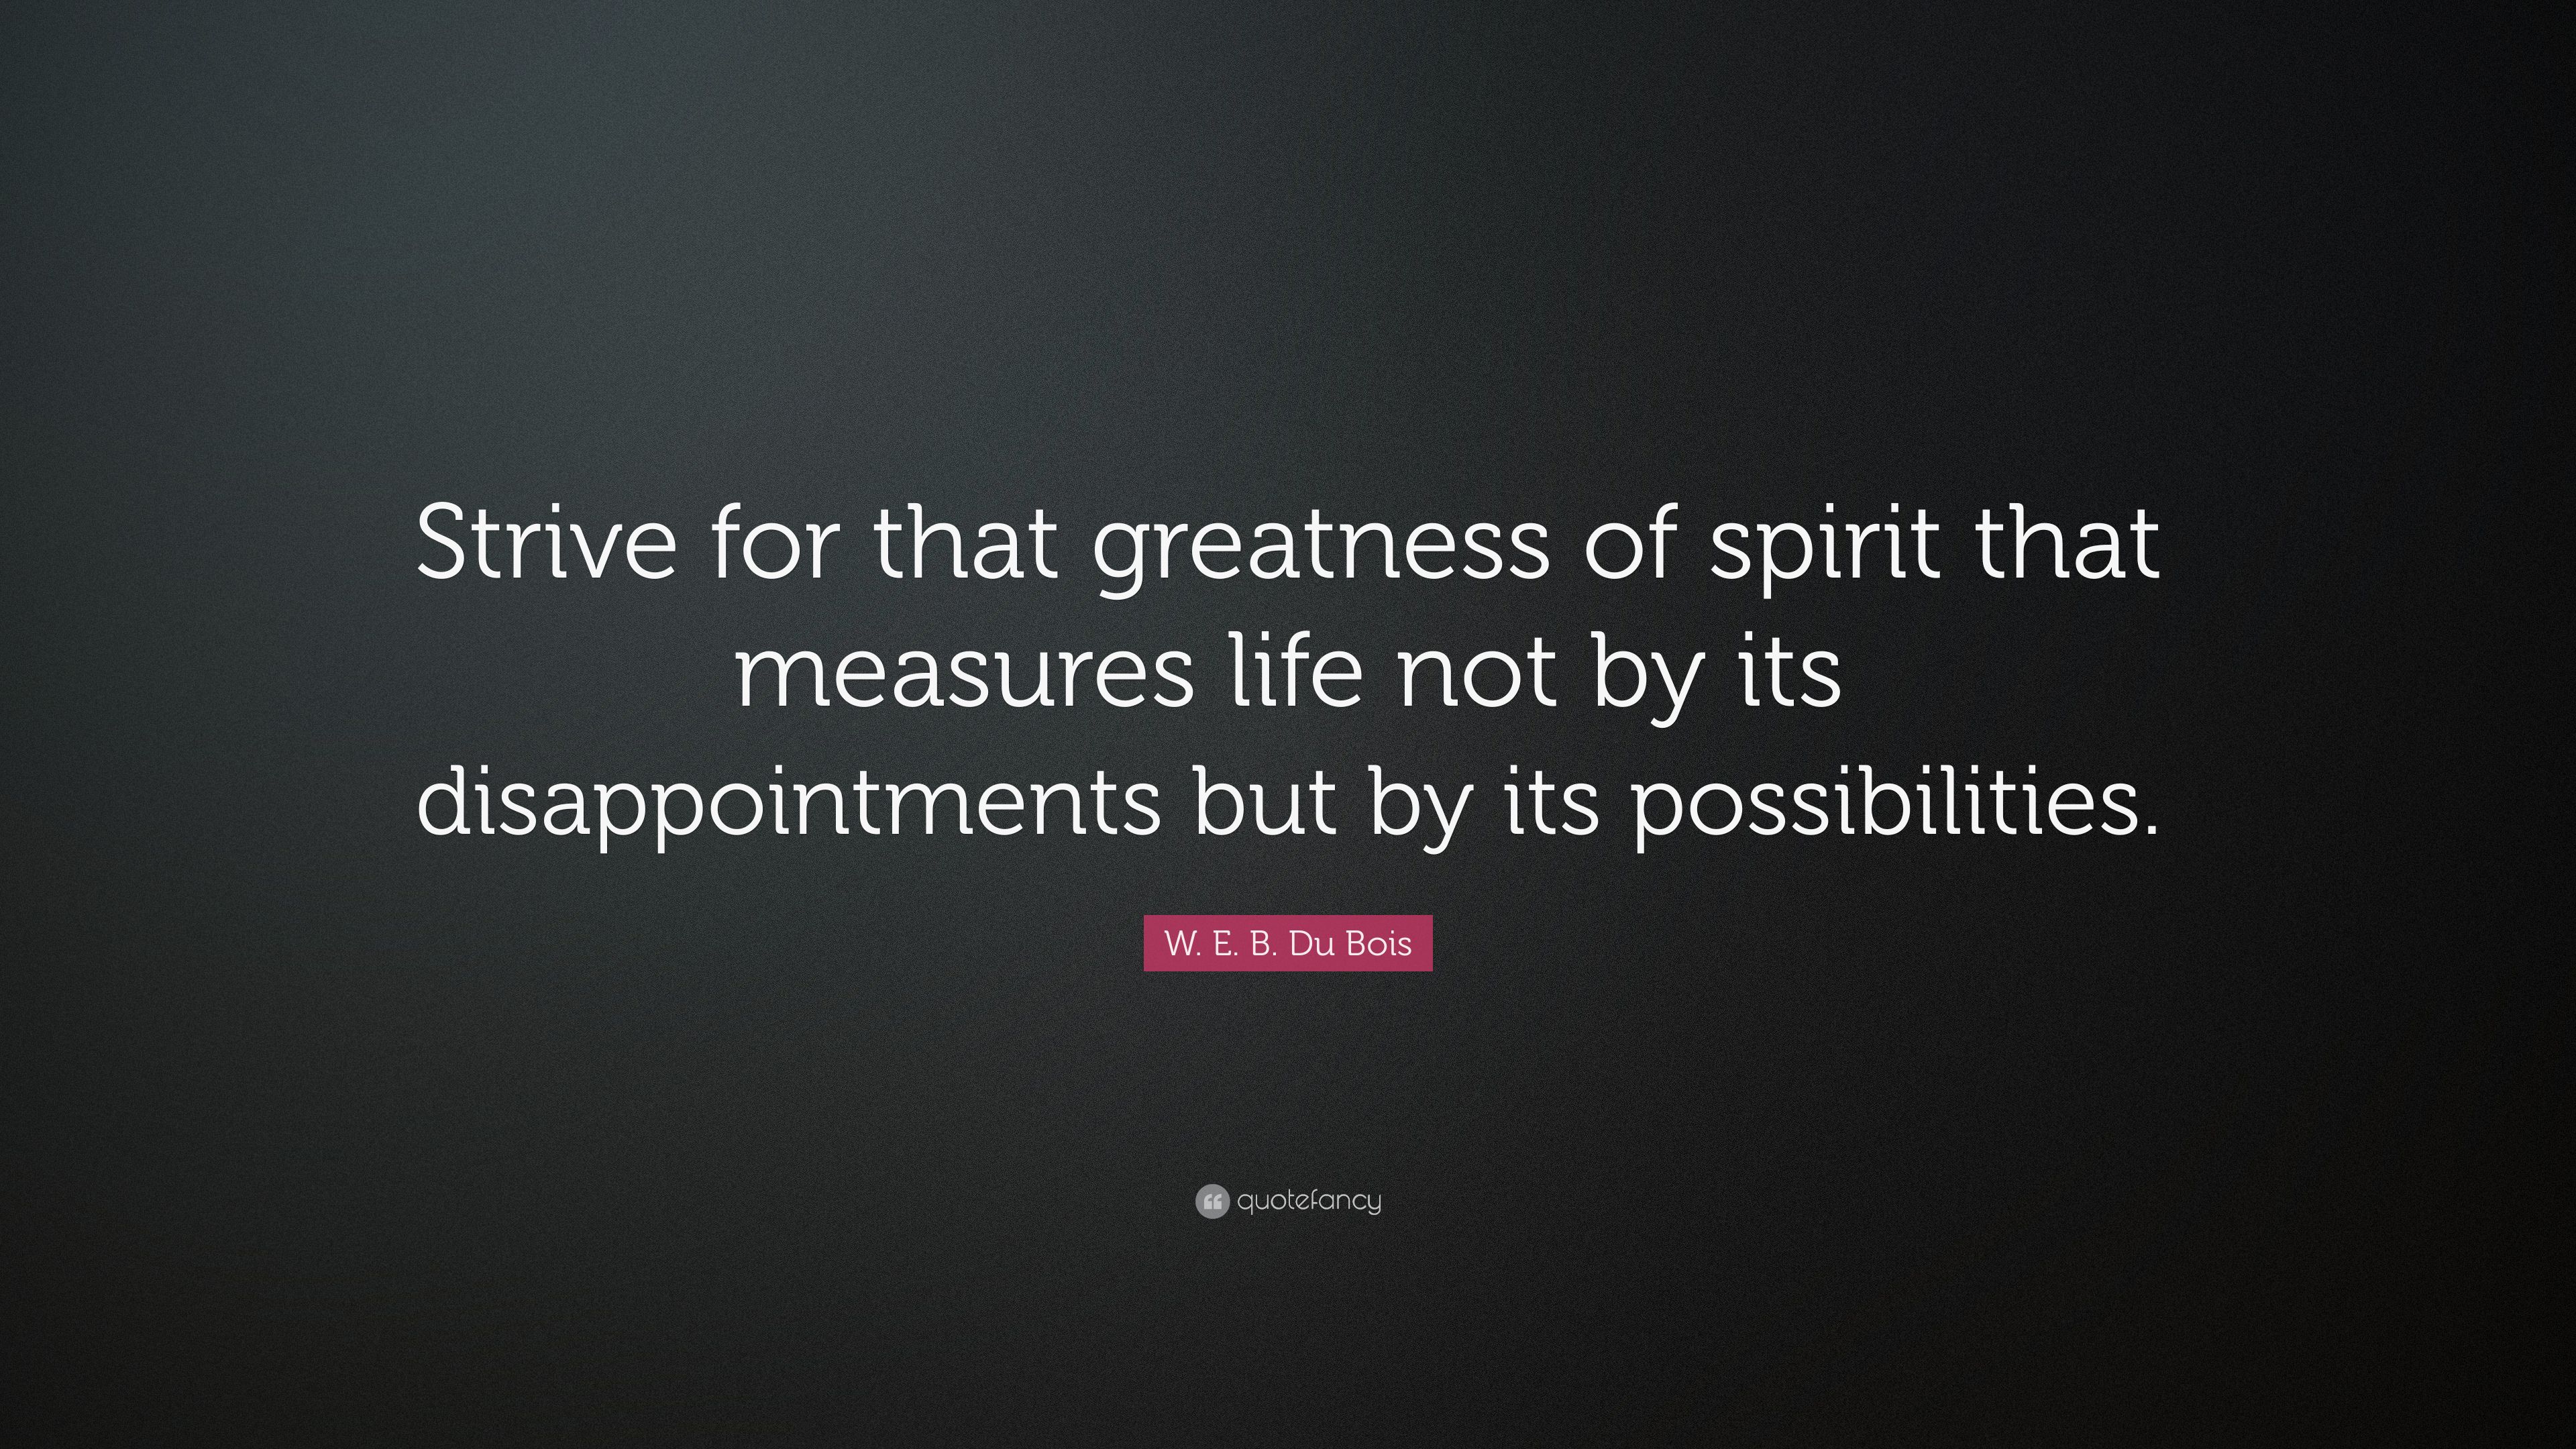 W. E. B. Du Bois Quote: “Strive for that greatness of spirit that